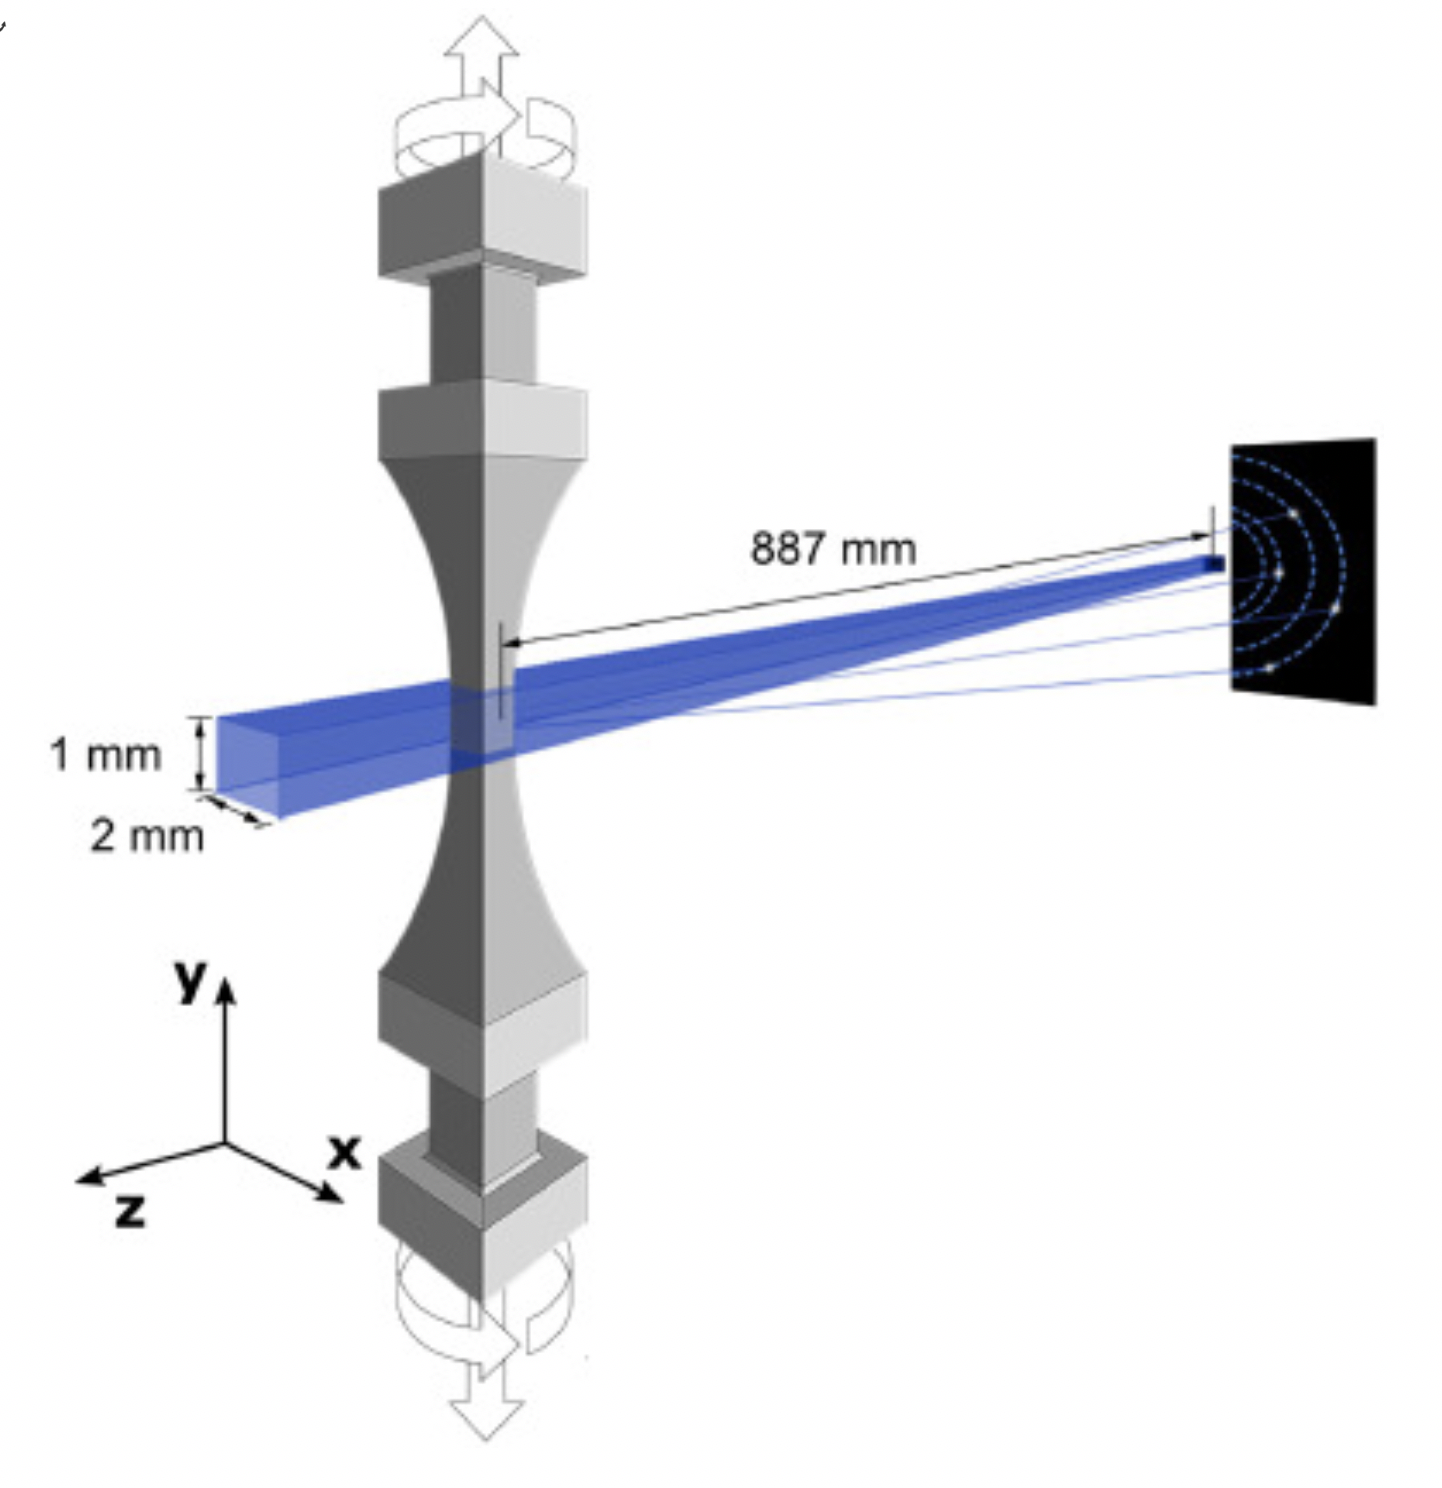 experimental configuration for the in-situ X-ray measurements